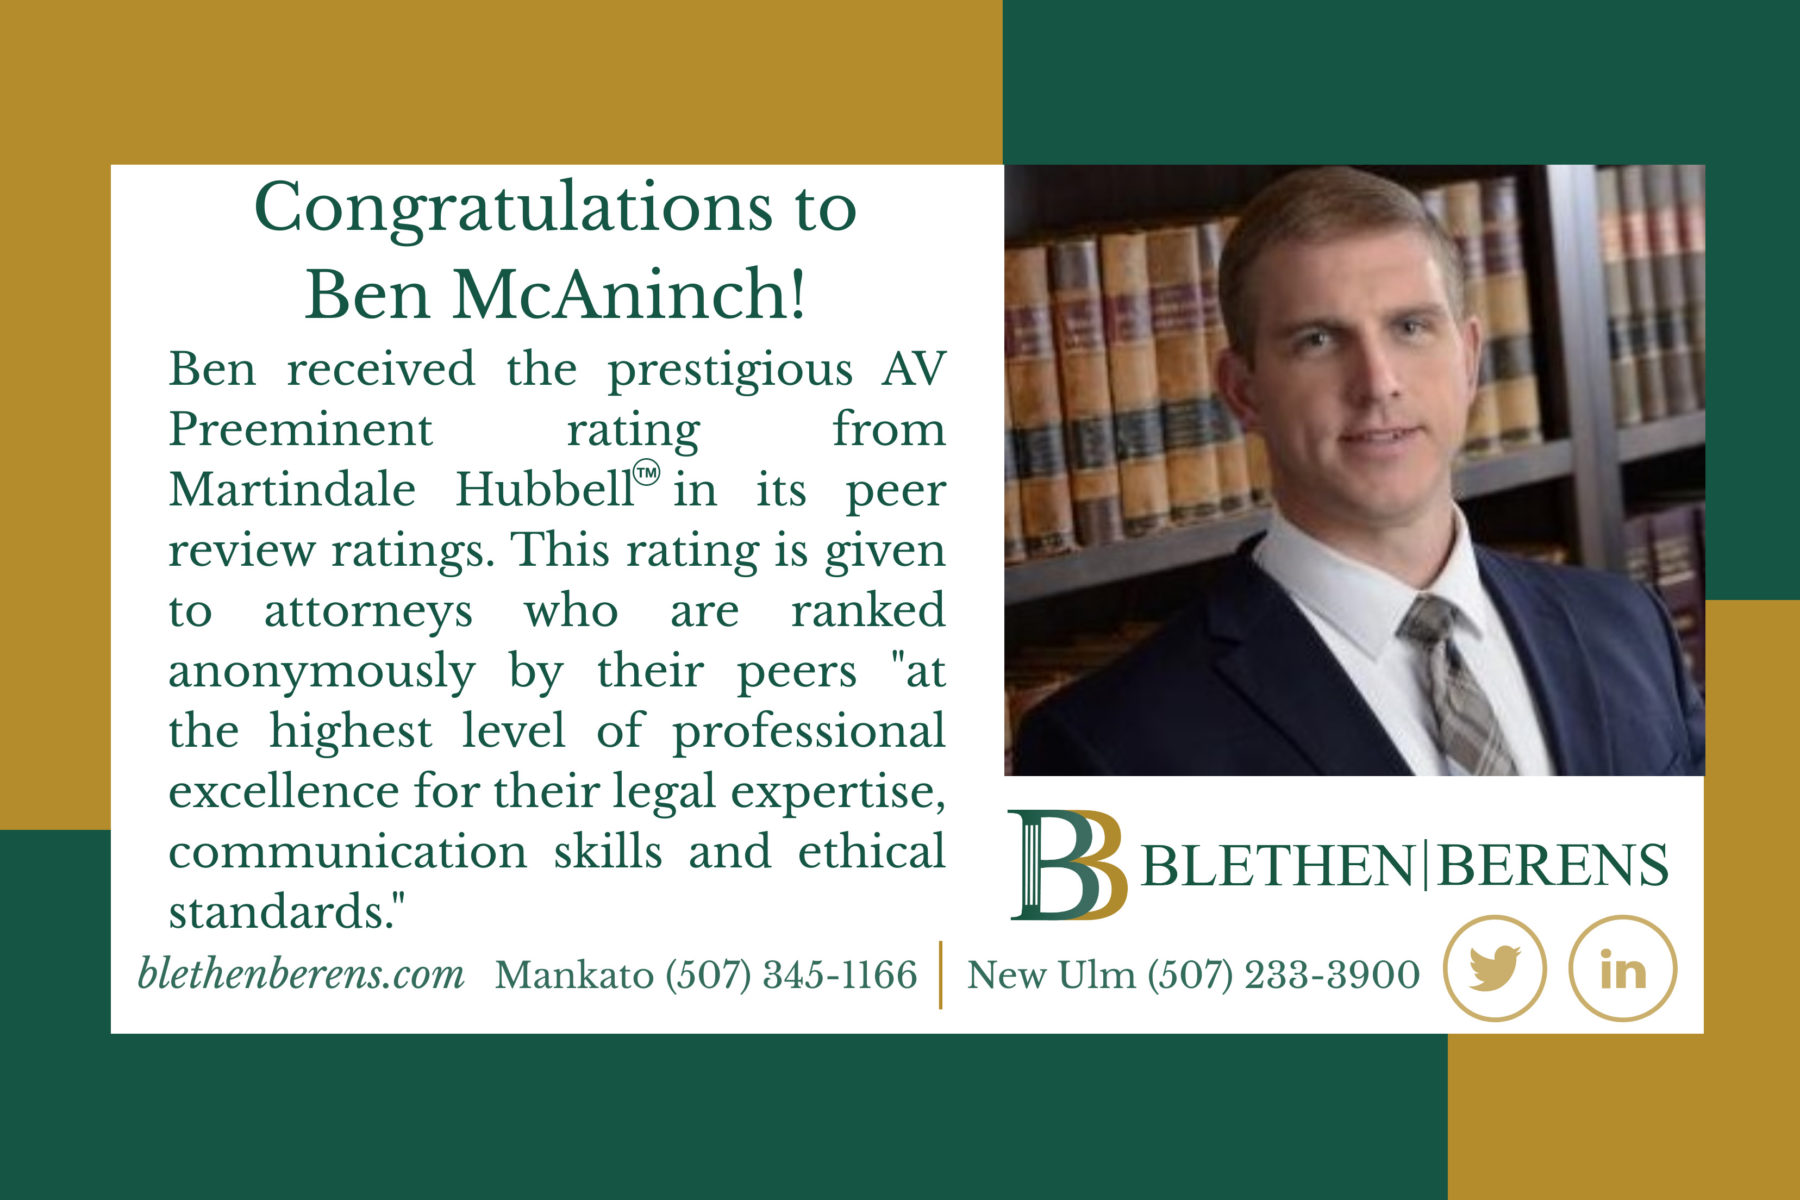 Ben received the prestigious AV Preeminent rating from Martindale Hubbell in its peer review ratings. This rating is given to attorneys who are ranked anonymously by their peers "at the highest level of professional excellence for their legal expertise, communication skills and ethical standards." Portrait of Ben McAninch